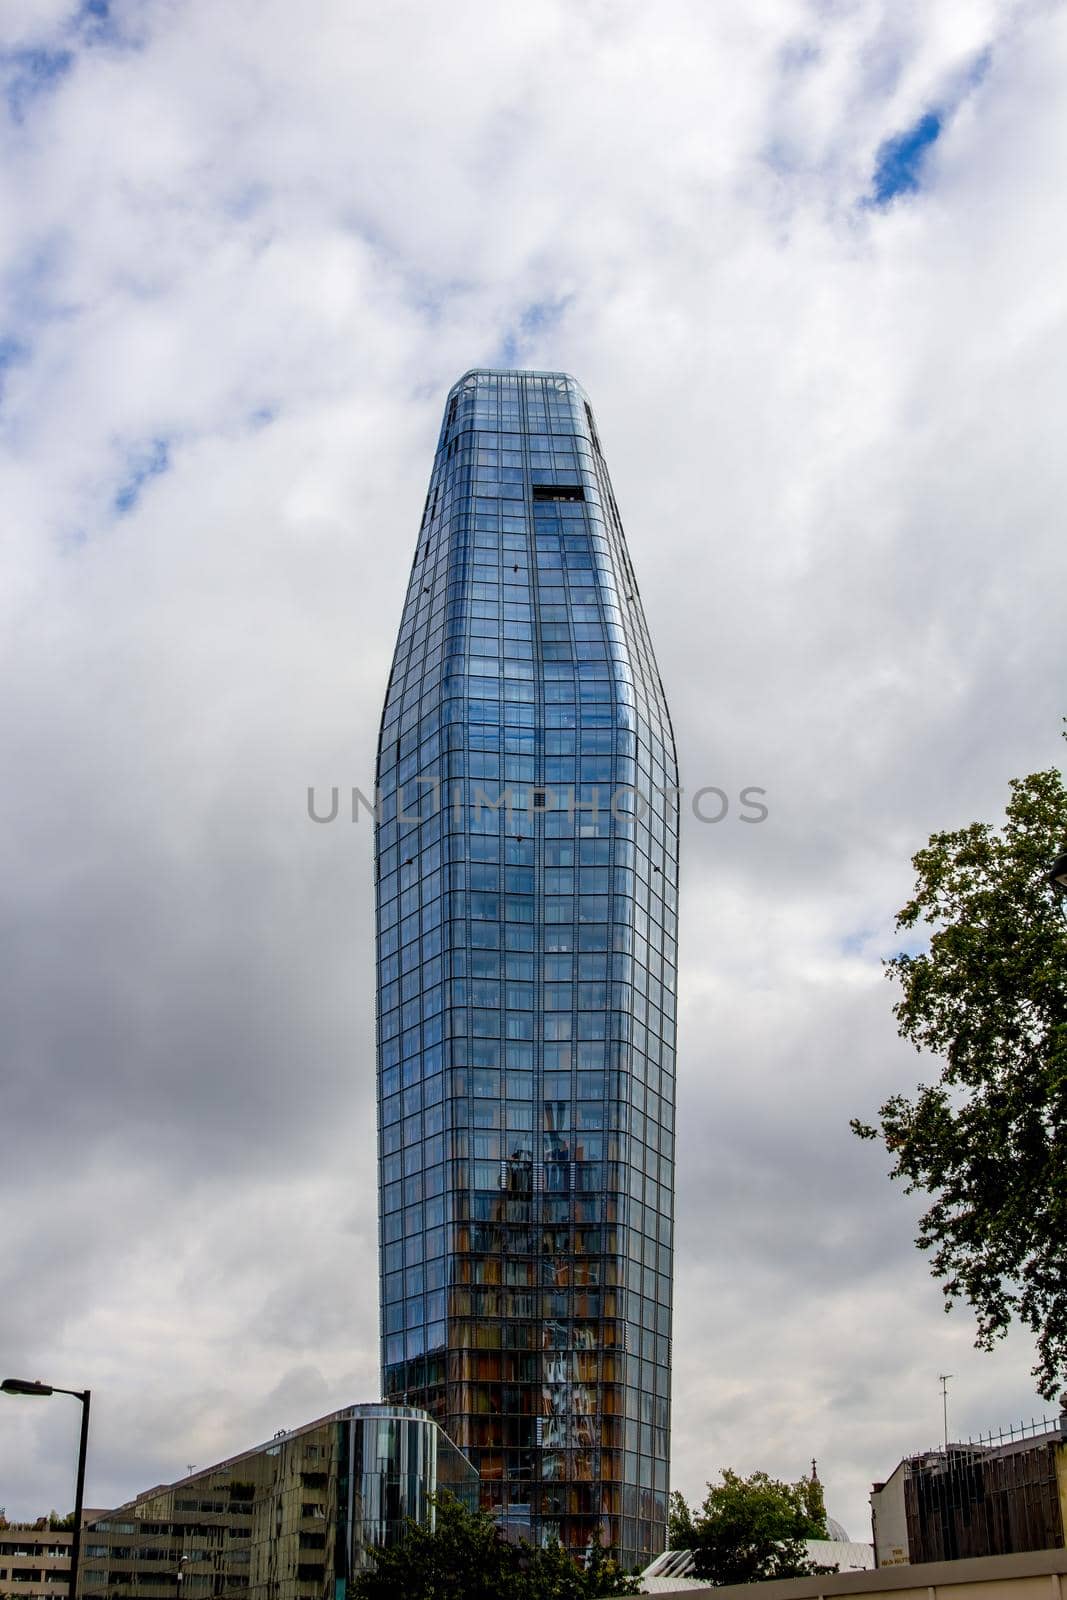 One Blackfriars, also known as The Boomerang or The Vase, in London by magicbones